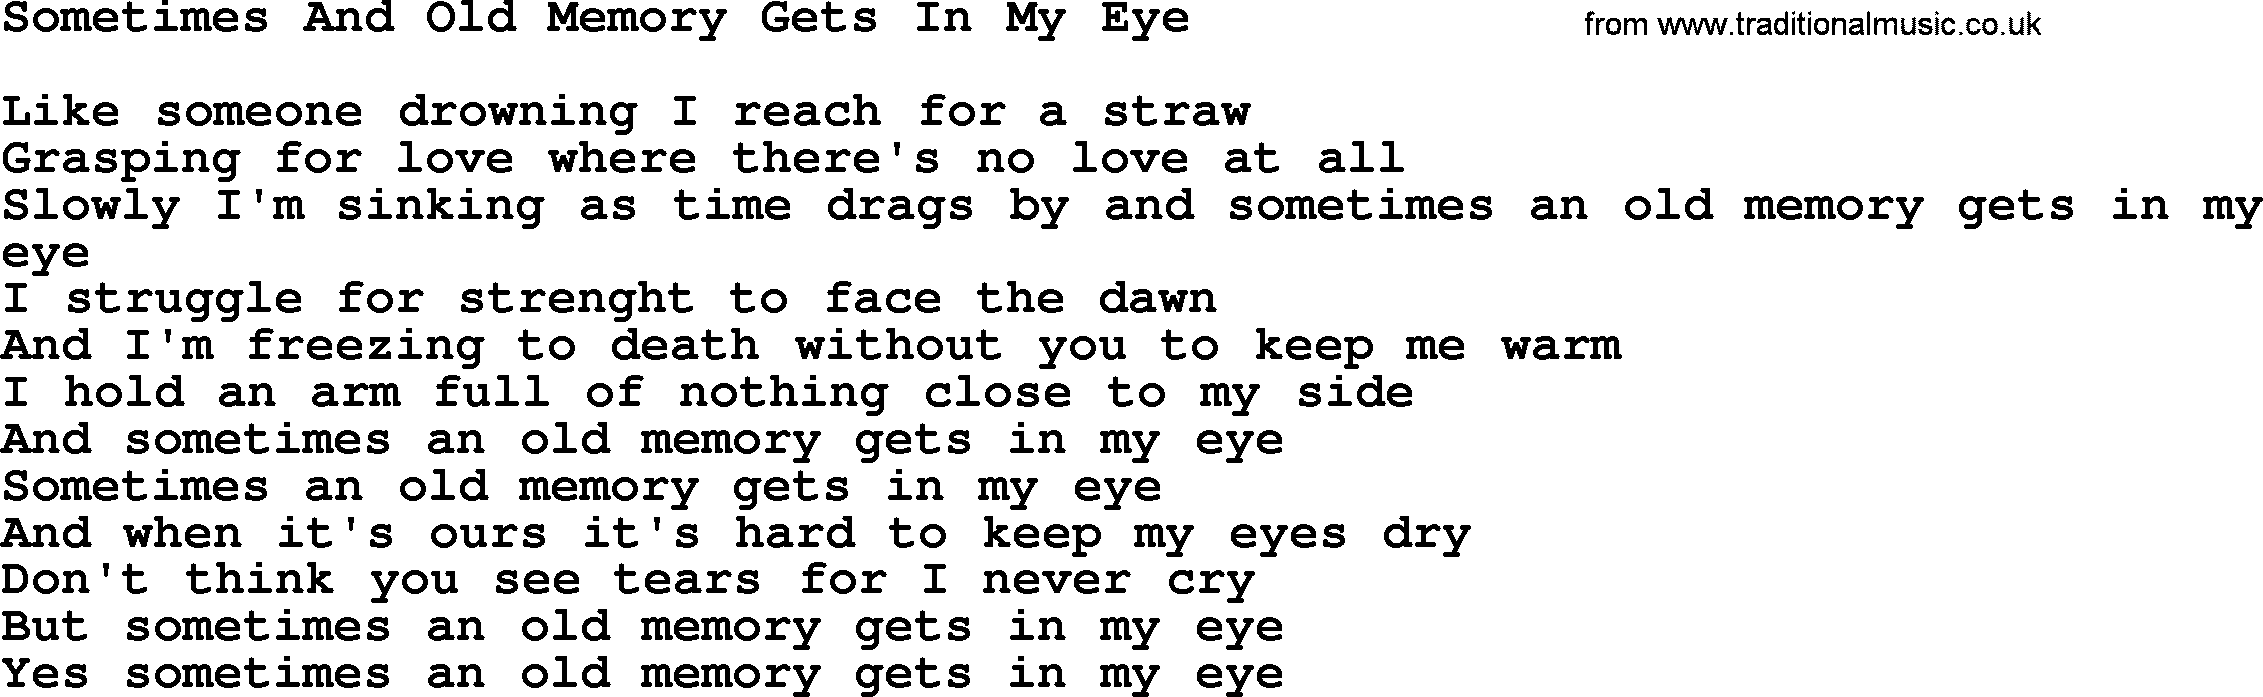 Dolly Parton song Sometimes And Old Memory Gets In My Eye.txt lyrics